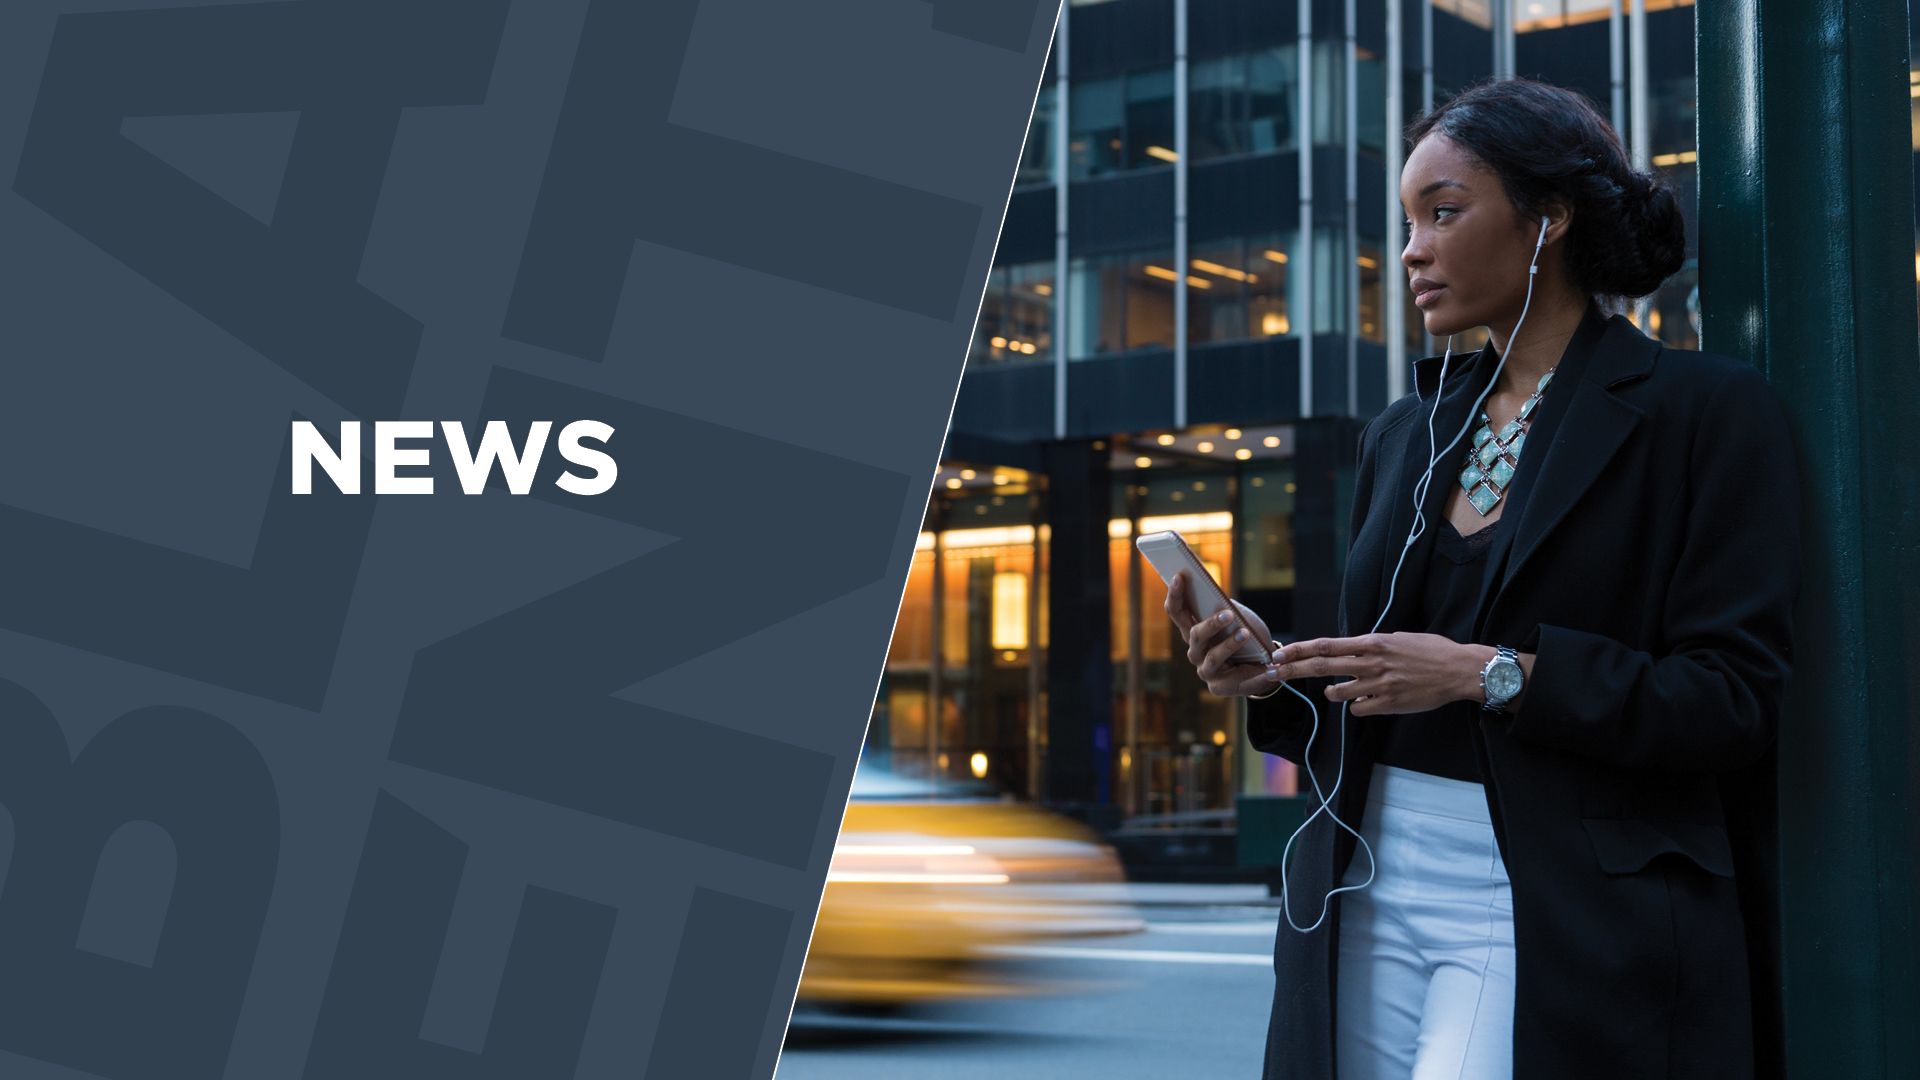 Founder Launches Black Crypto News Platform To Empower And Educate The Black Community In Web 3